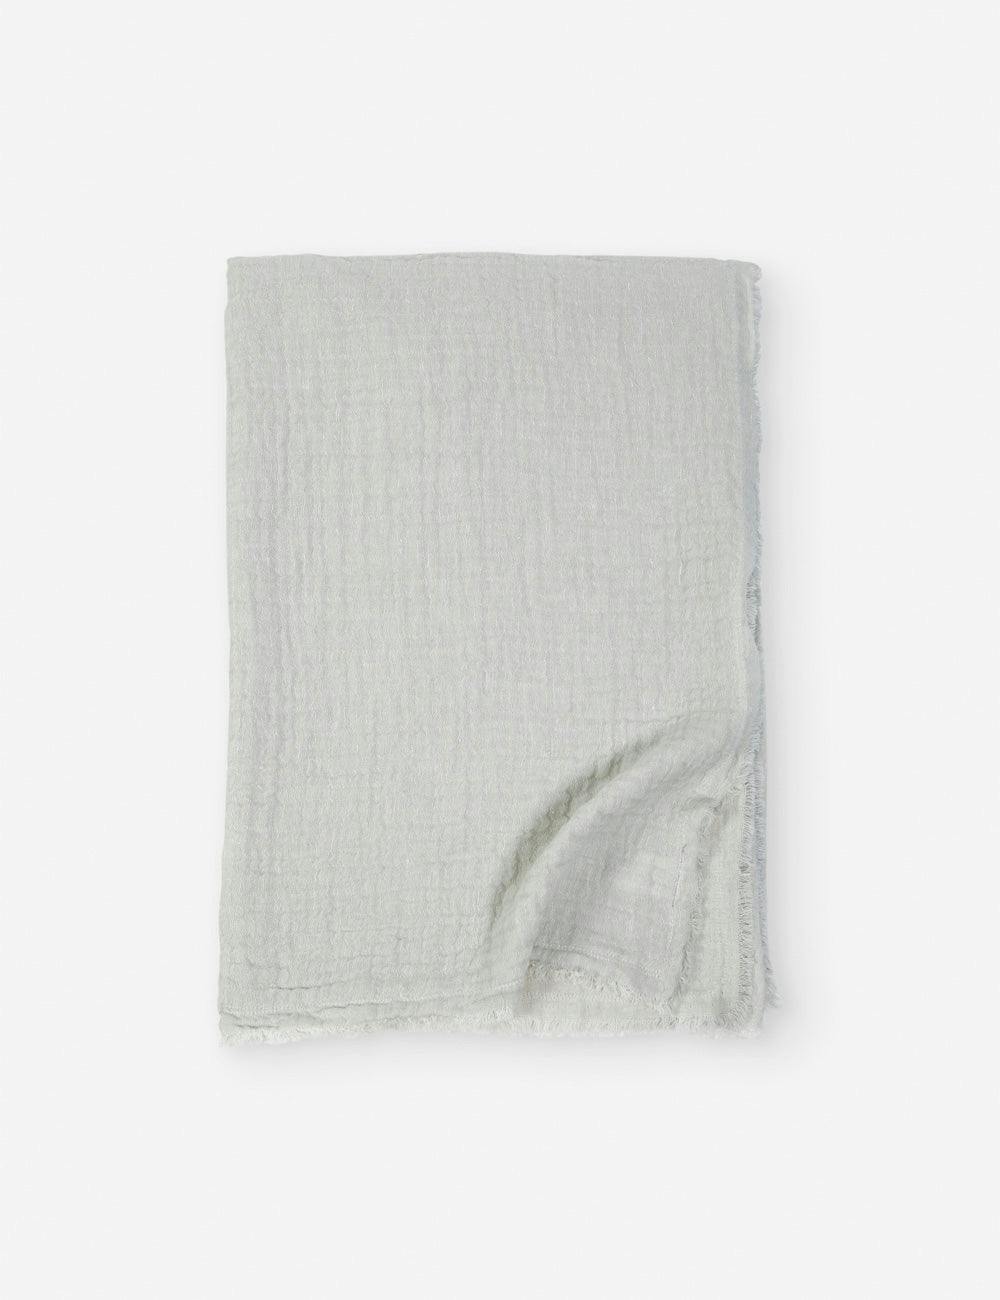 Hermosa Ocean Oversized Throw by Pom Pom at Home